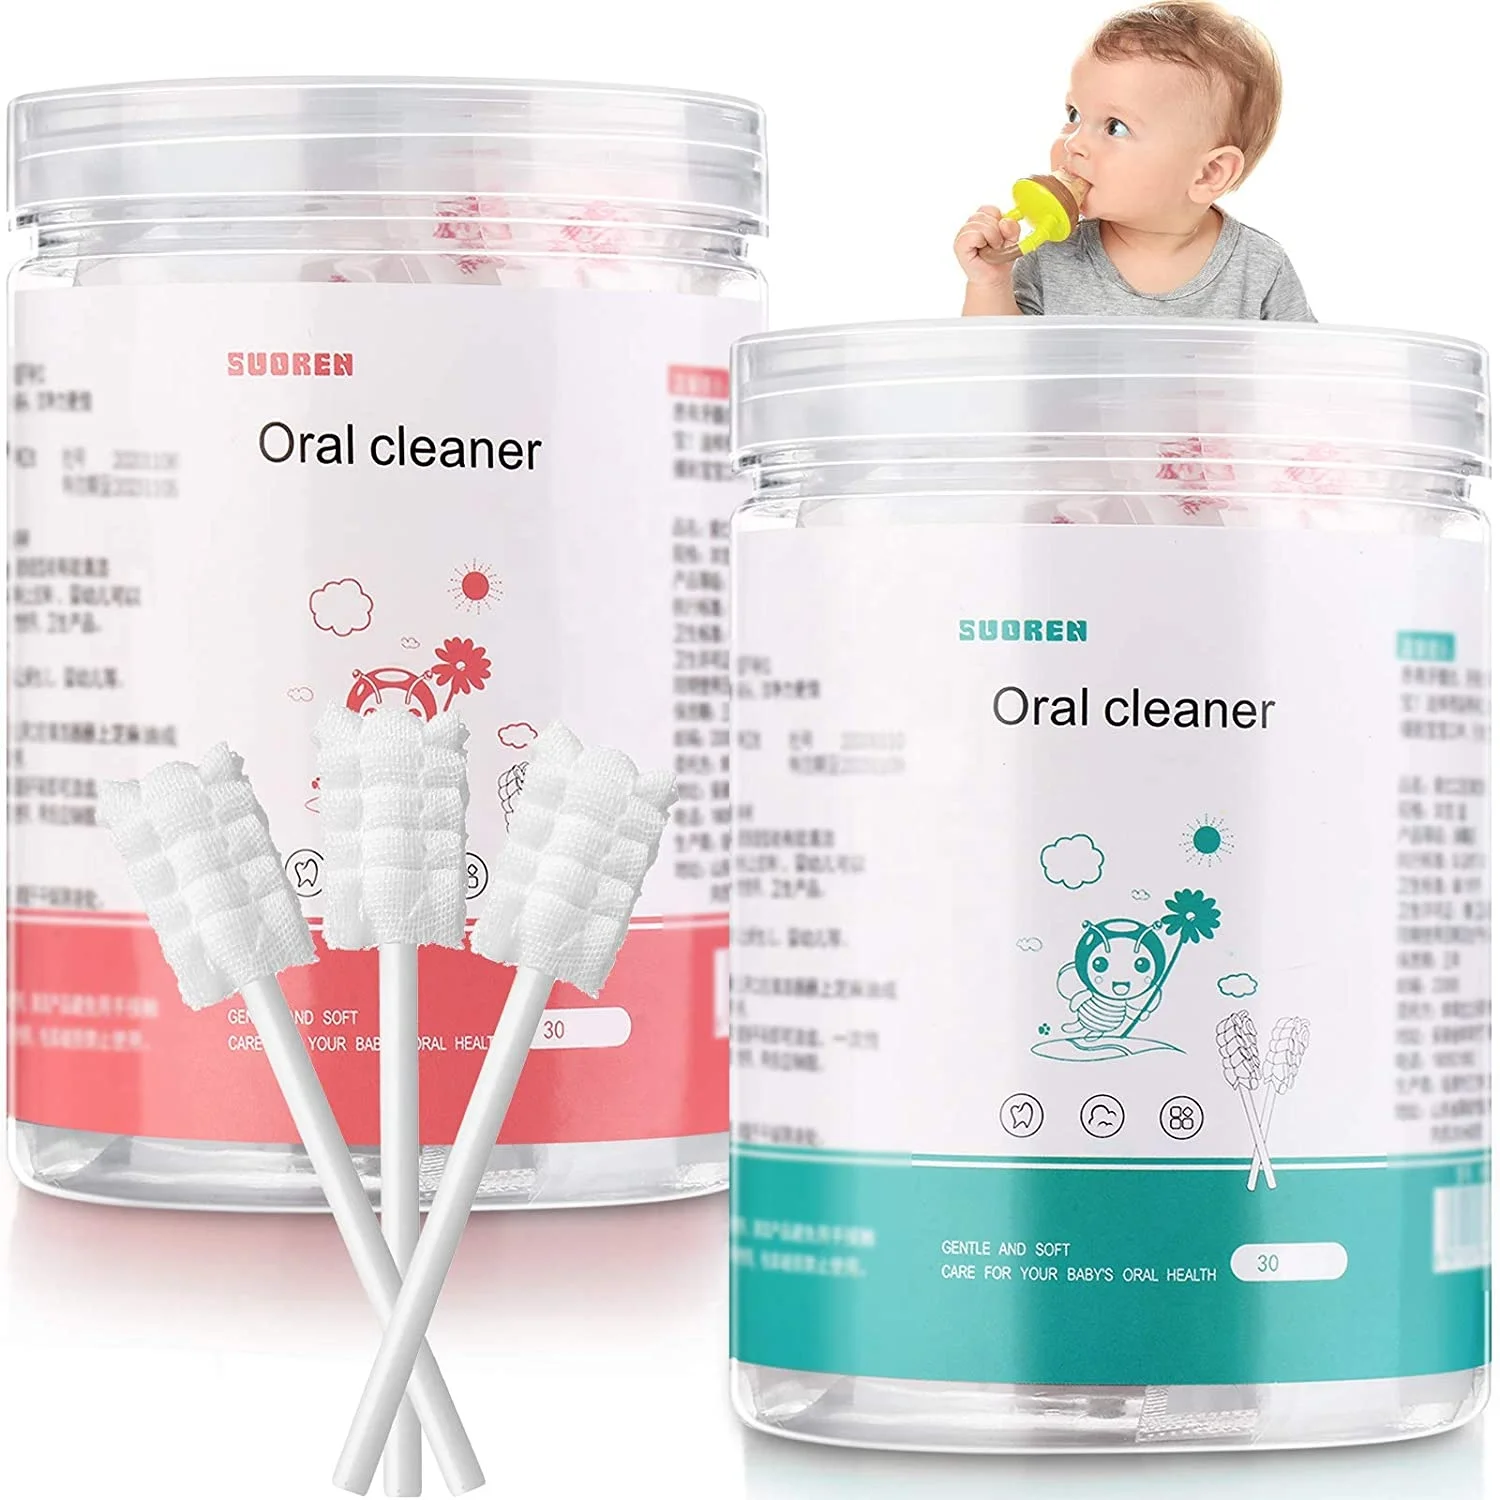 

Baby Toothbrush Infant Toothbrush Baby Tongue Cleaner Newborn Toothbrush Tongue Cleaner Dental Care for 0-36 Months Baby, White